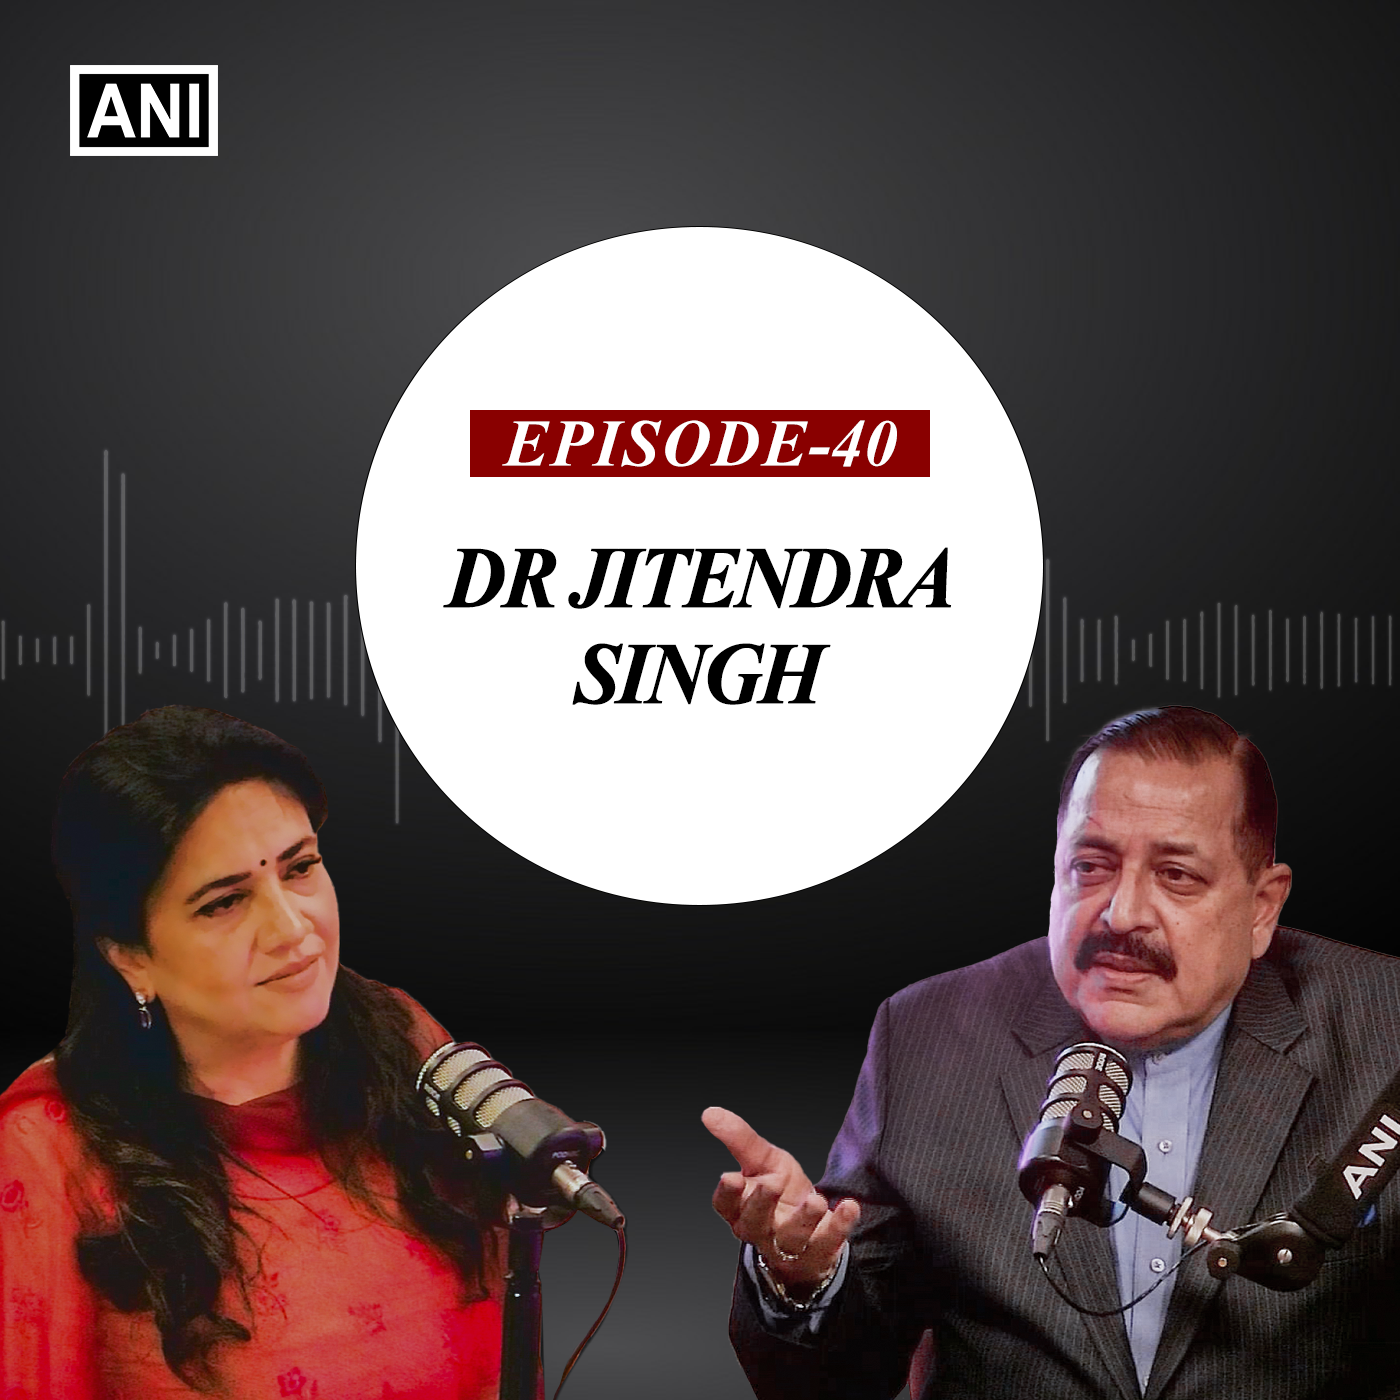 Episode 40 - Union Minister Dr Jitendra Singh talks about a developing Kashmir, responds to Adani-Hindenburg row